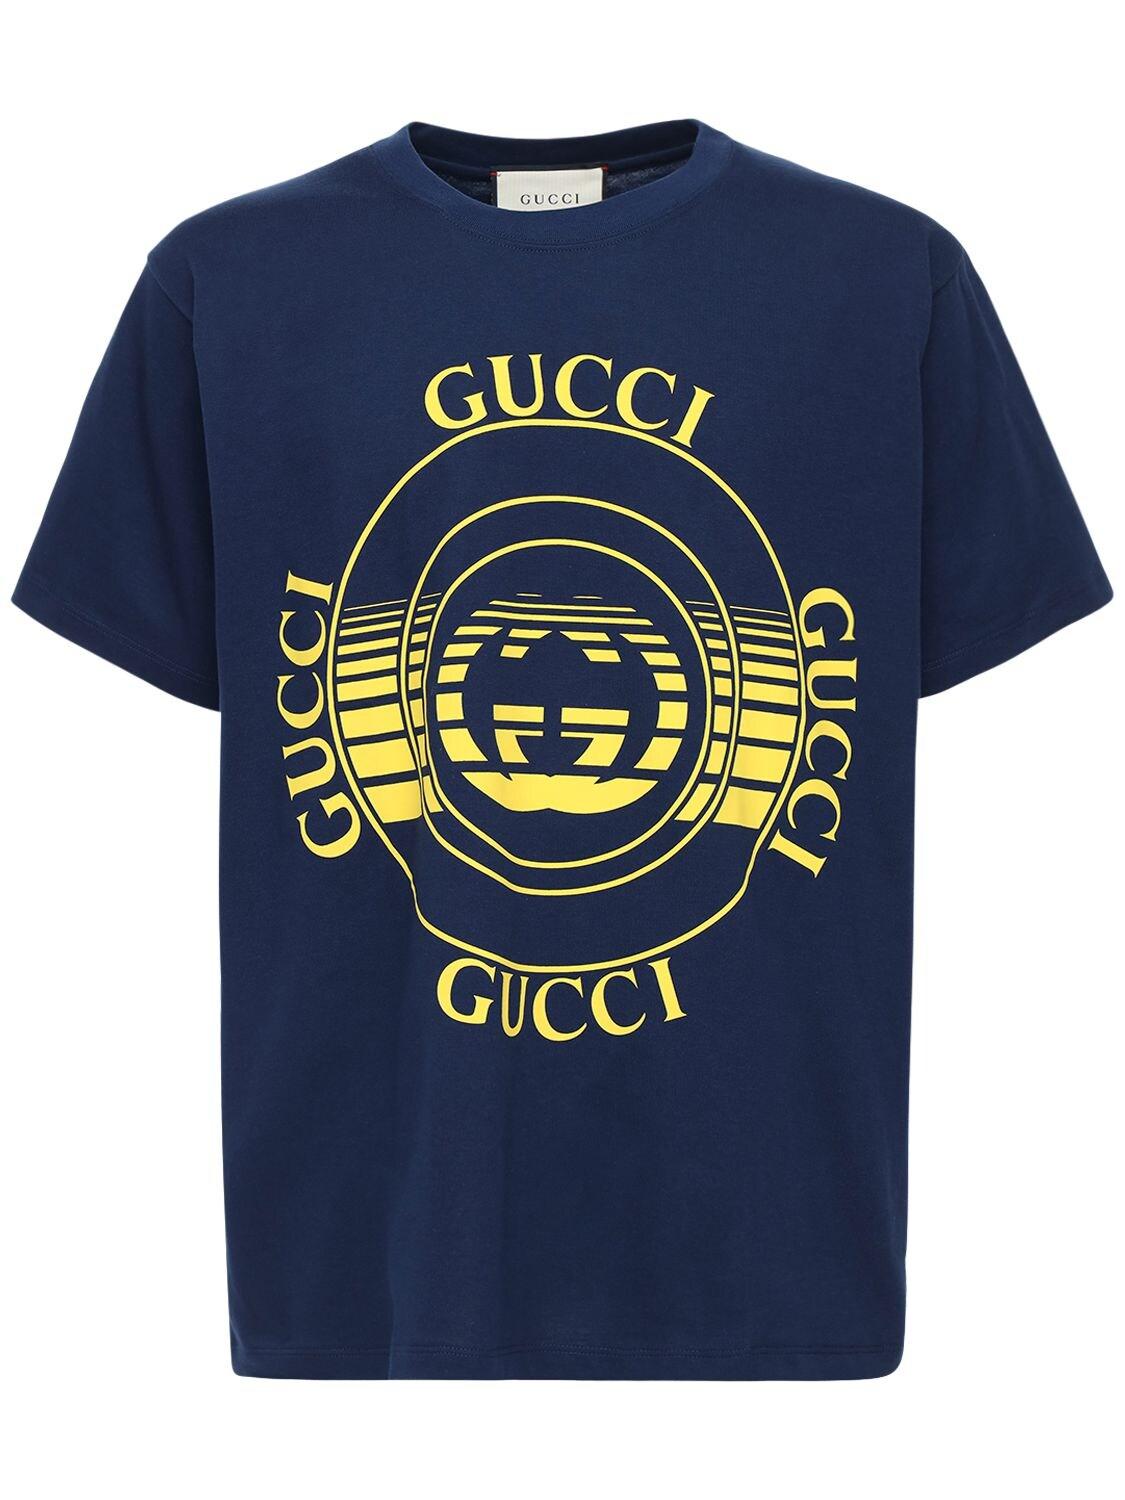 Gucci Cotton Disk Print Oversize T-shirt in Blue for Men - Lyst